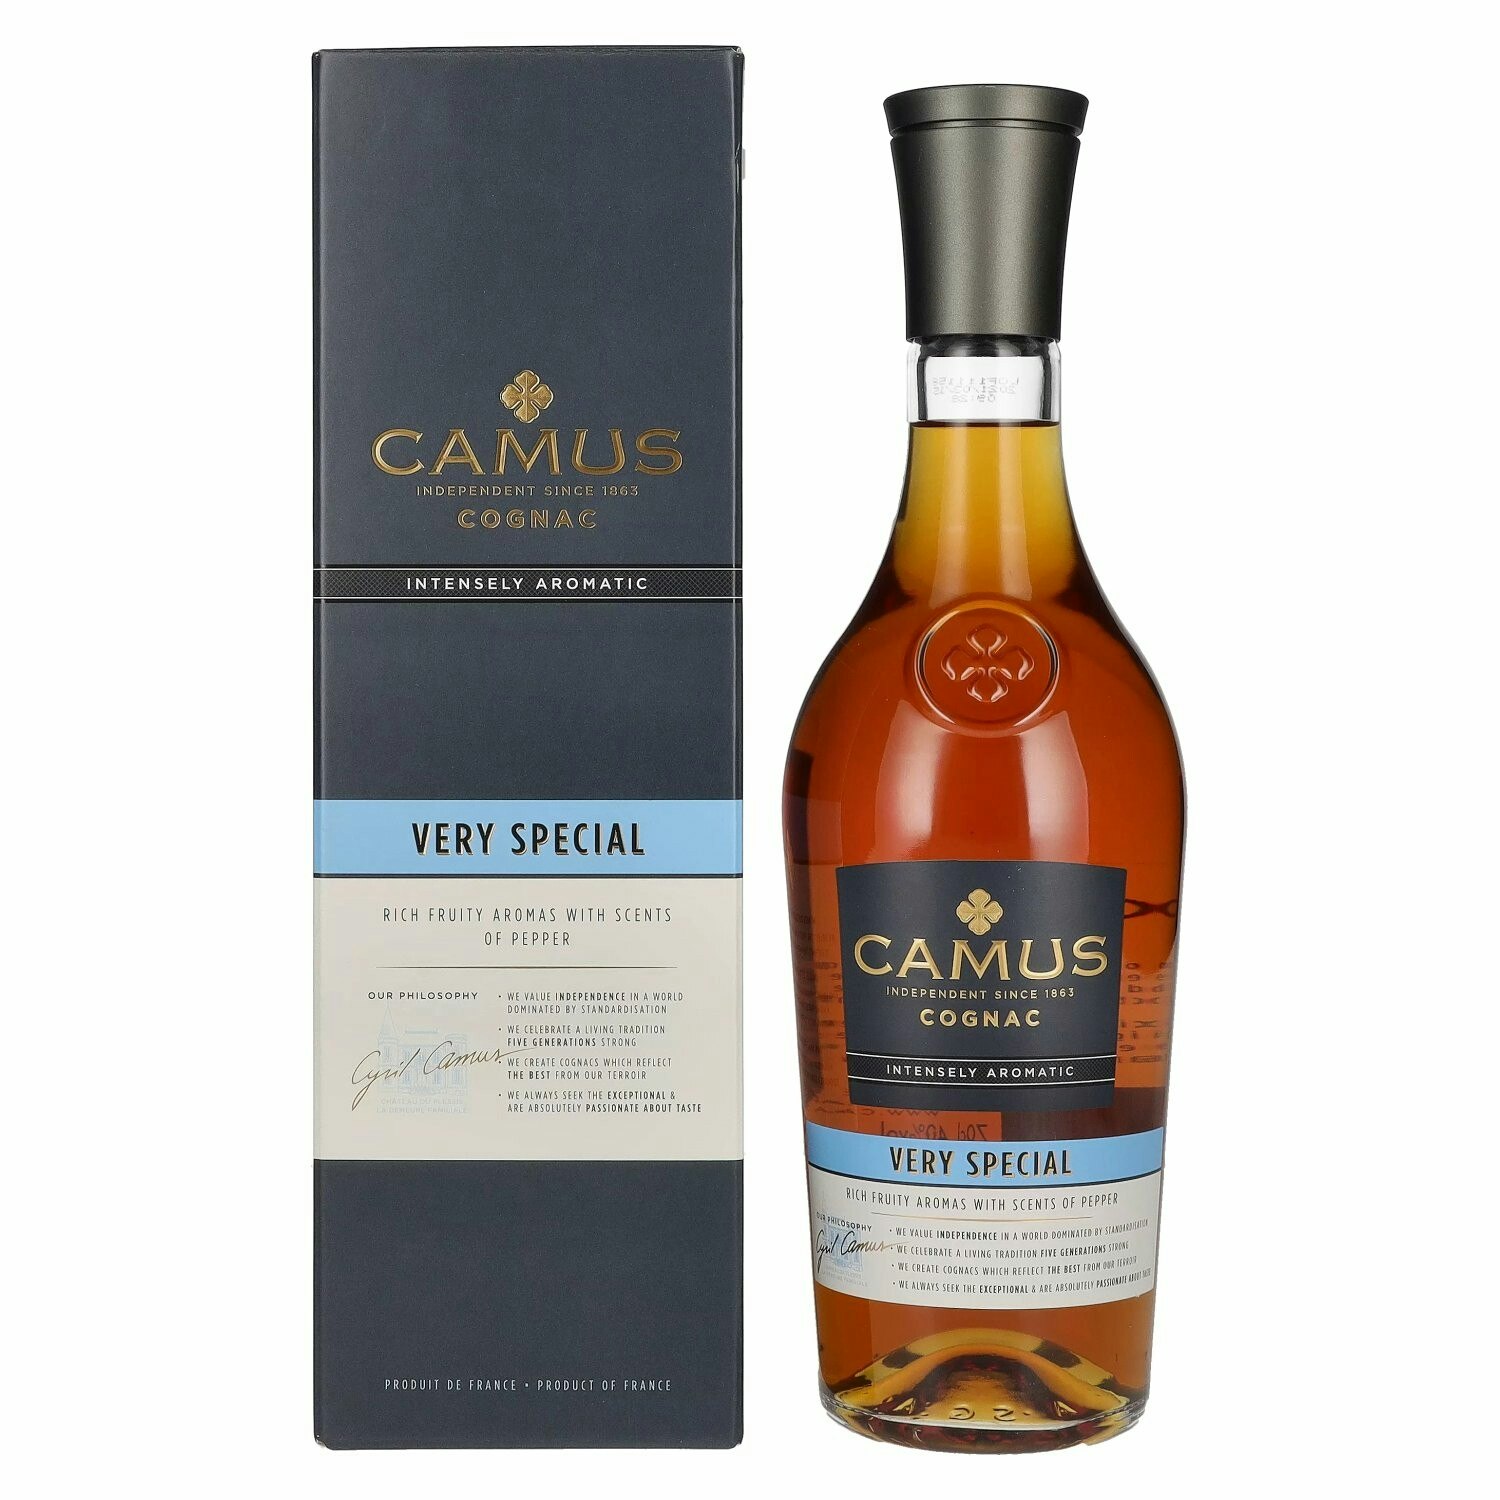 Camus VERY SPECIAL Intensely Aromatic Cognac 40% Vol. 0,7l in Giftbox